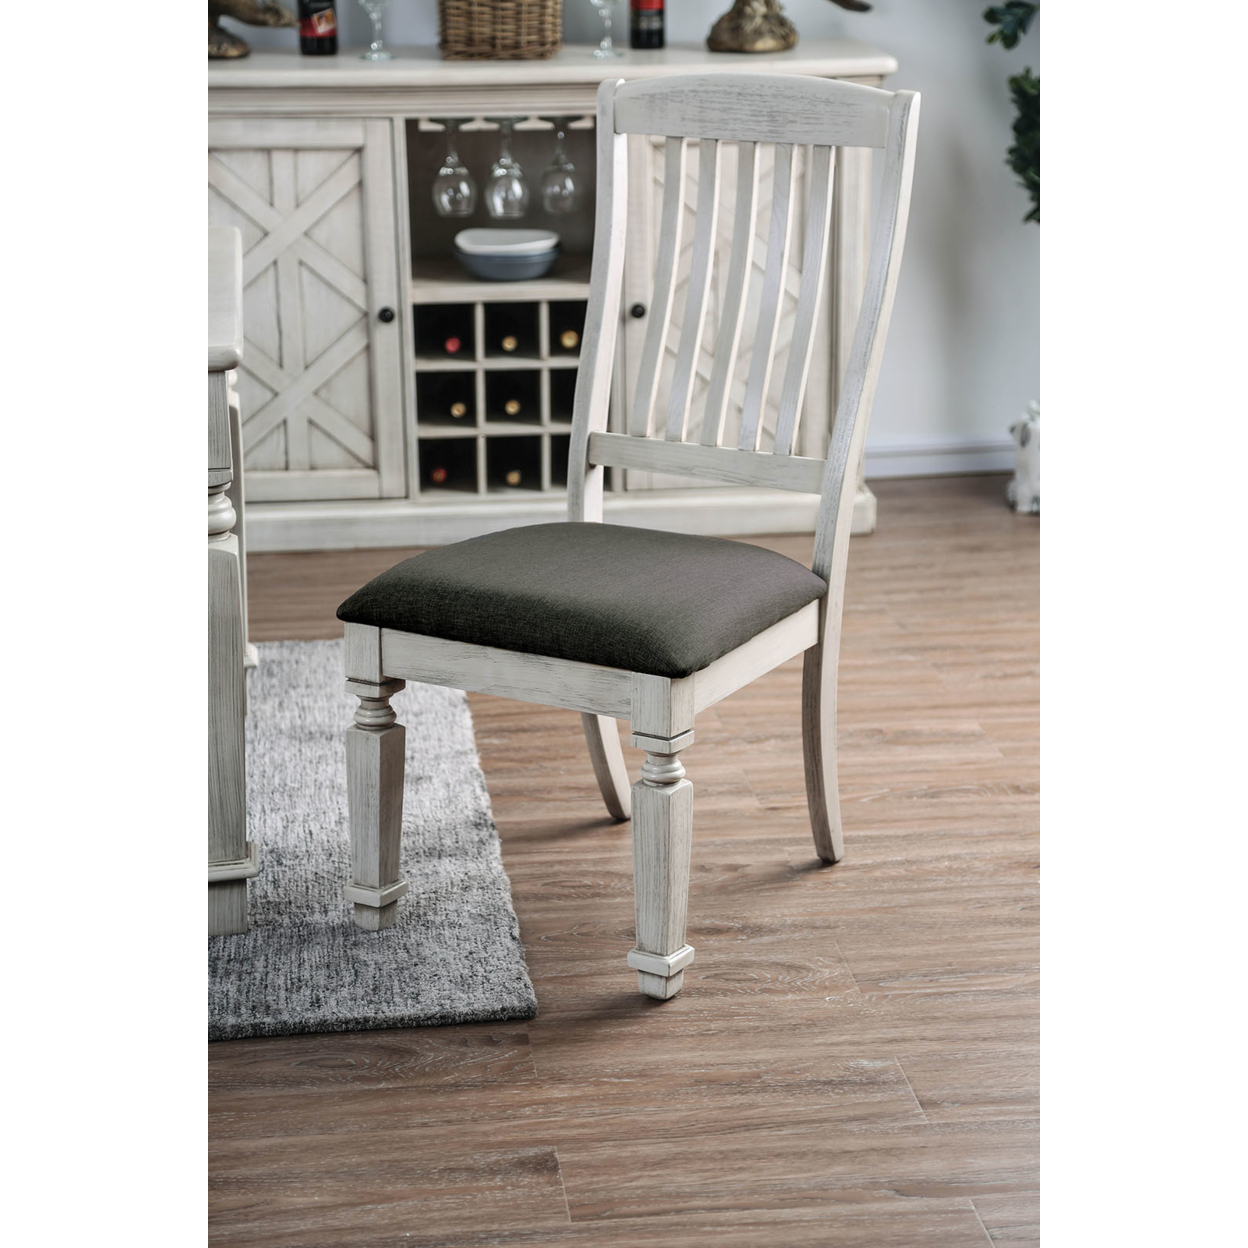 Wooden Side Chair With Fabric Upholstered Padded Seat, Pack Of Two, Antique White And Gray- Saltoro Sherpi